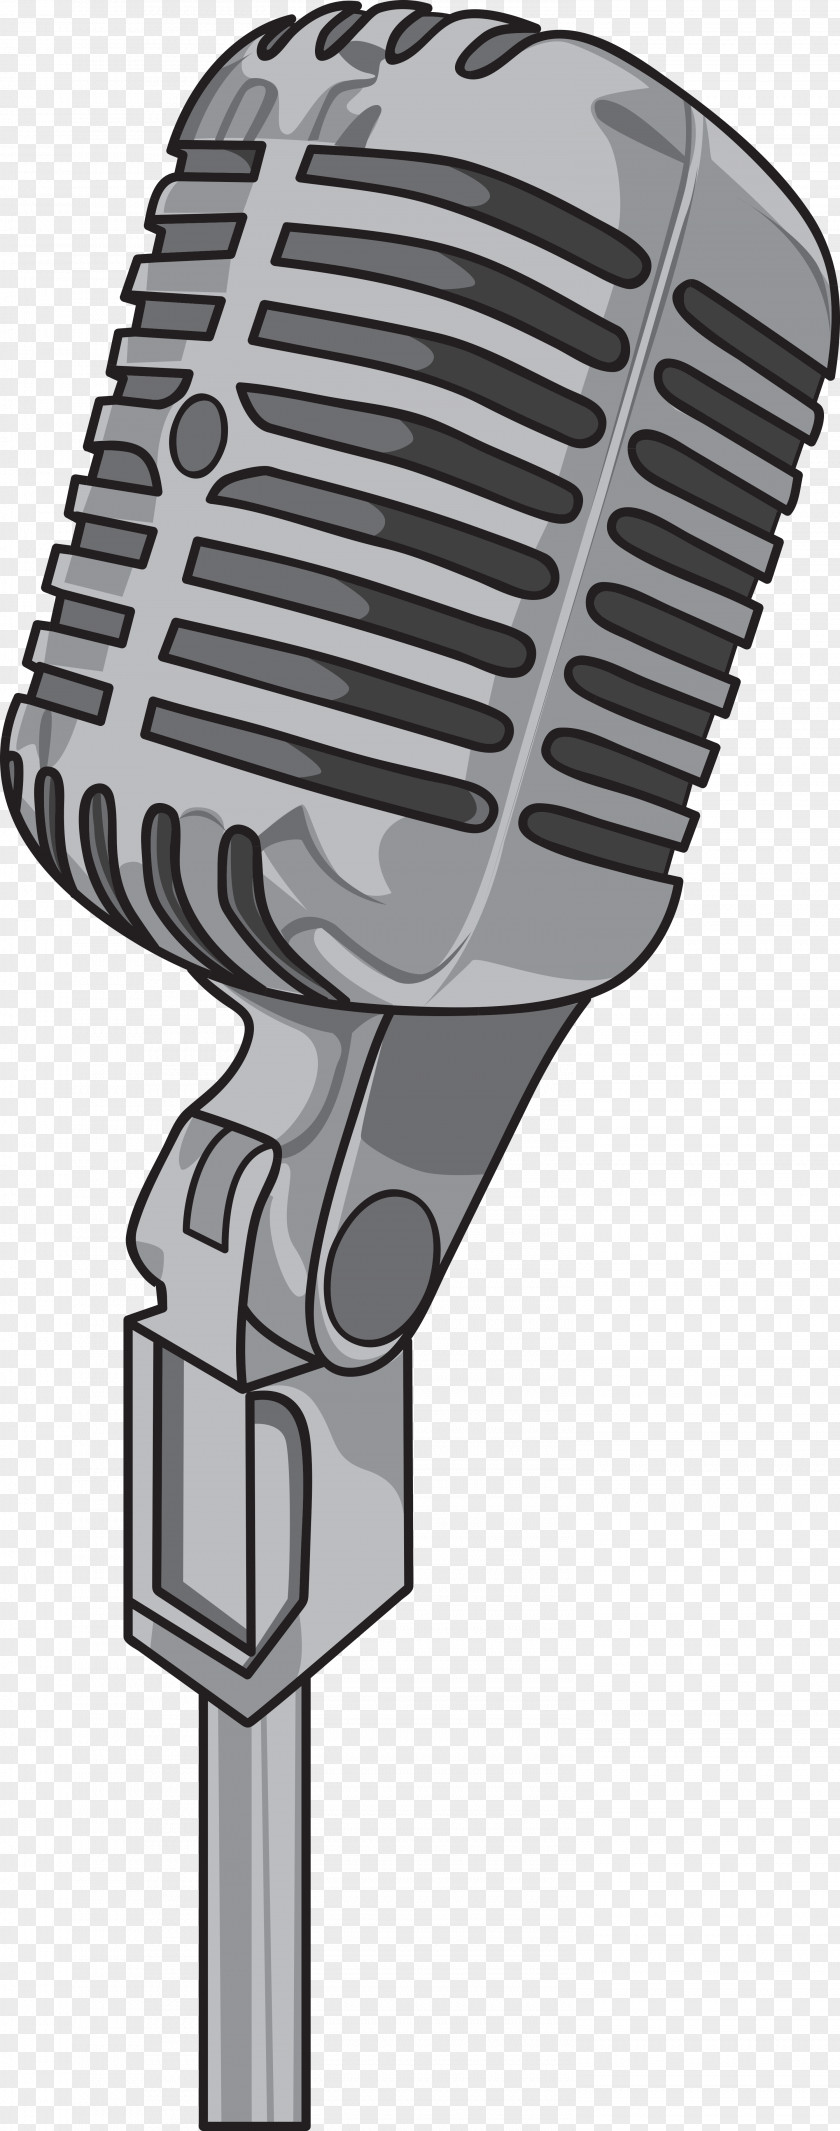 Mic Microphone Sound Recording And Reproduction Podcast Audio PNG